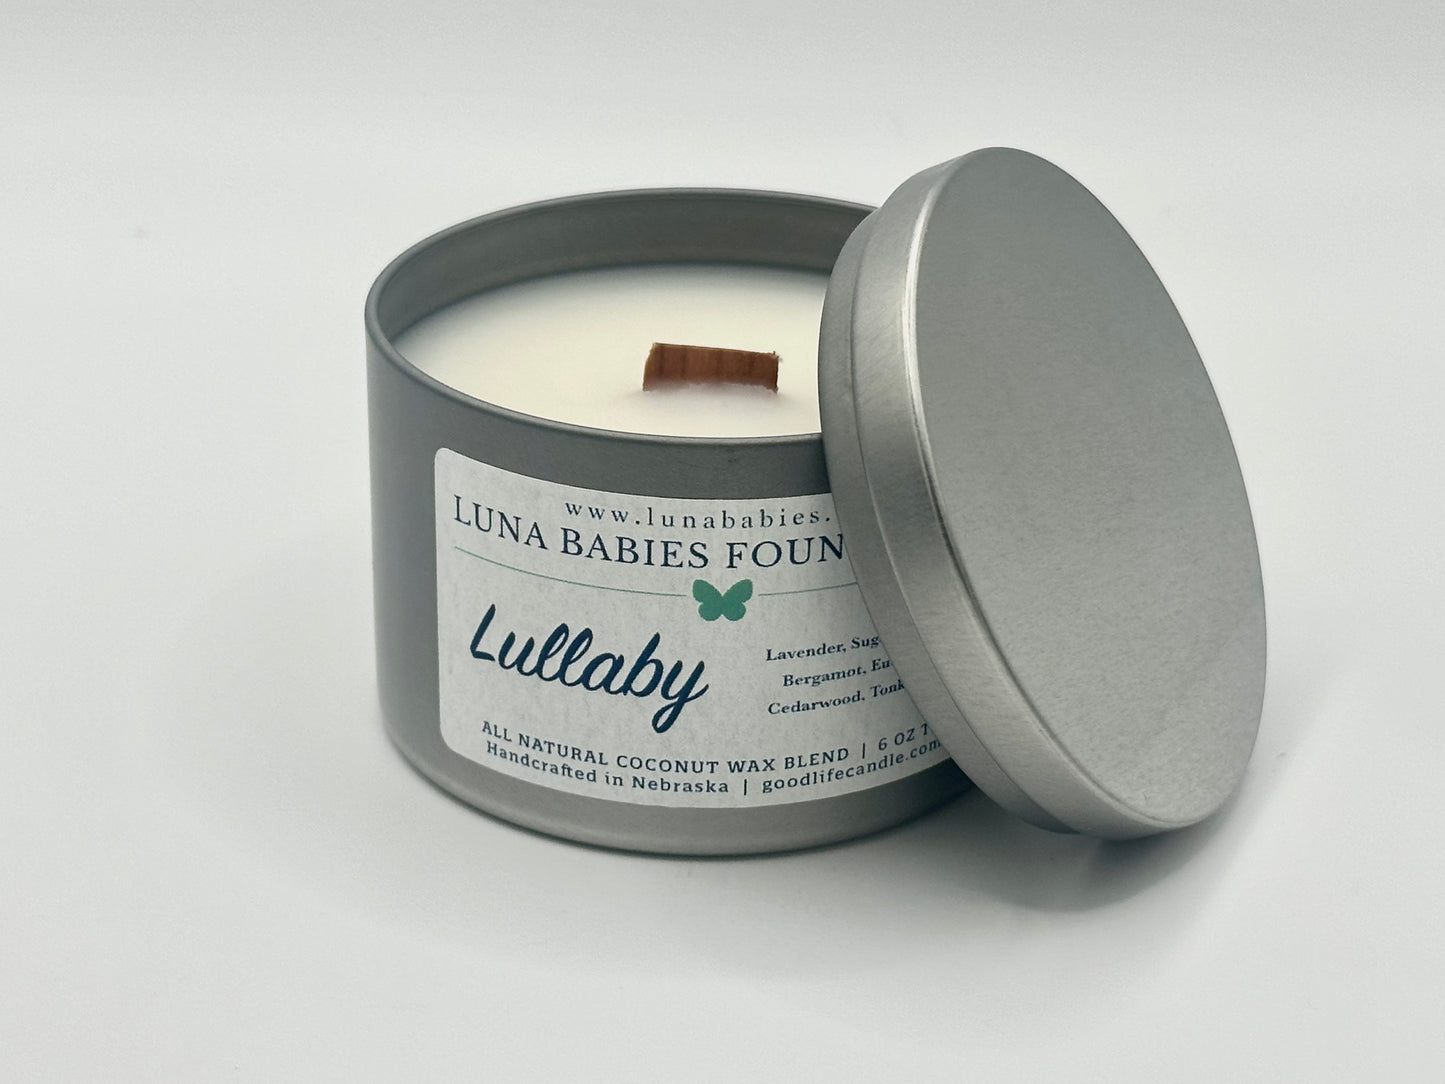 Lullaby Scented Candle - In Partnership with the Luna Babies Foundation